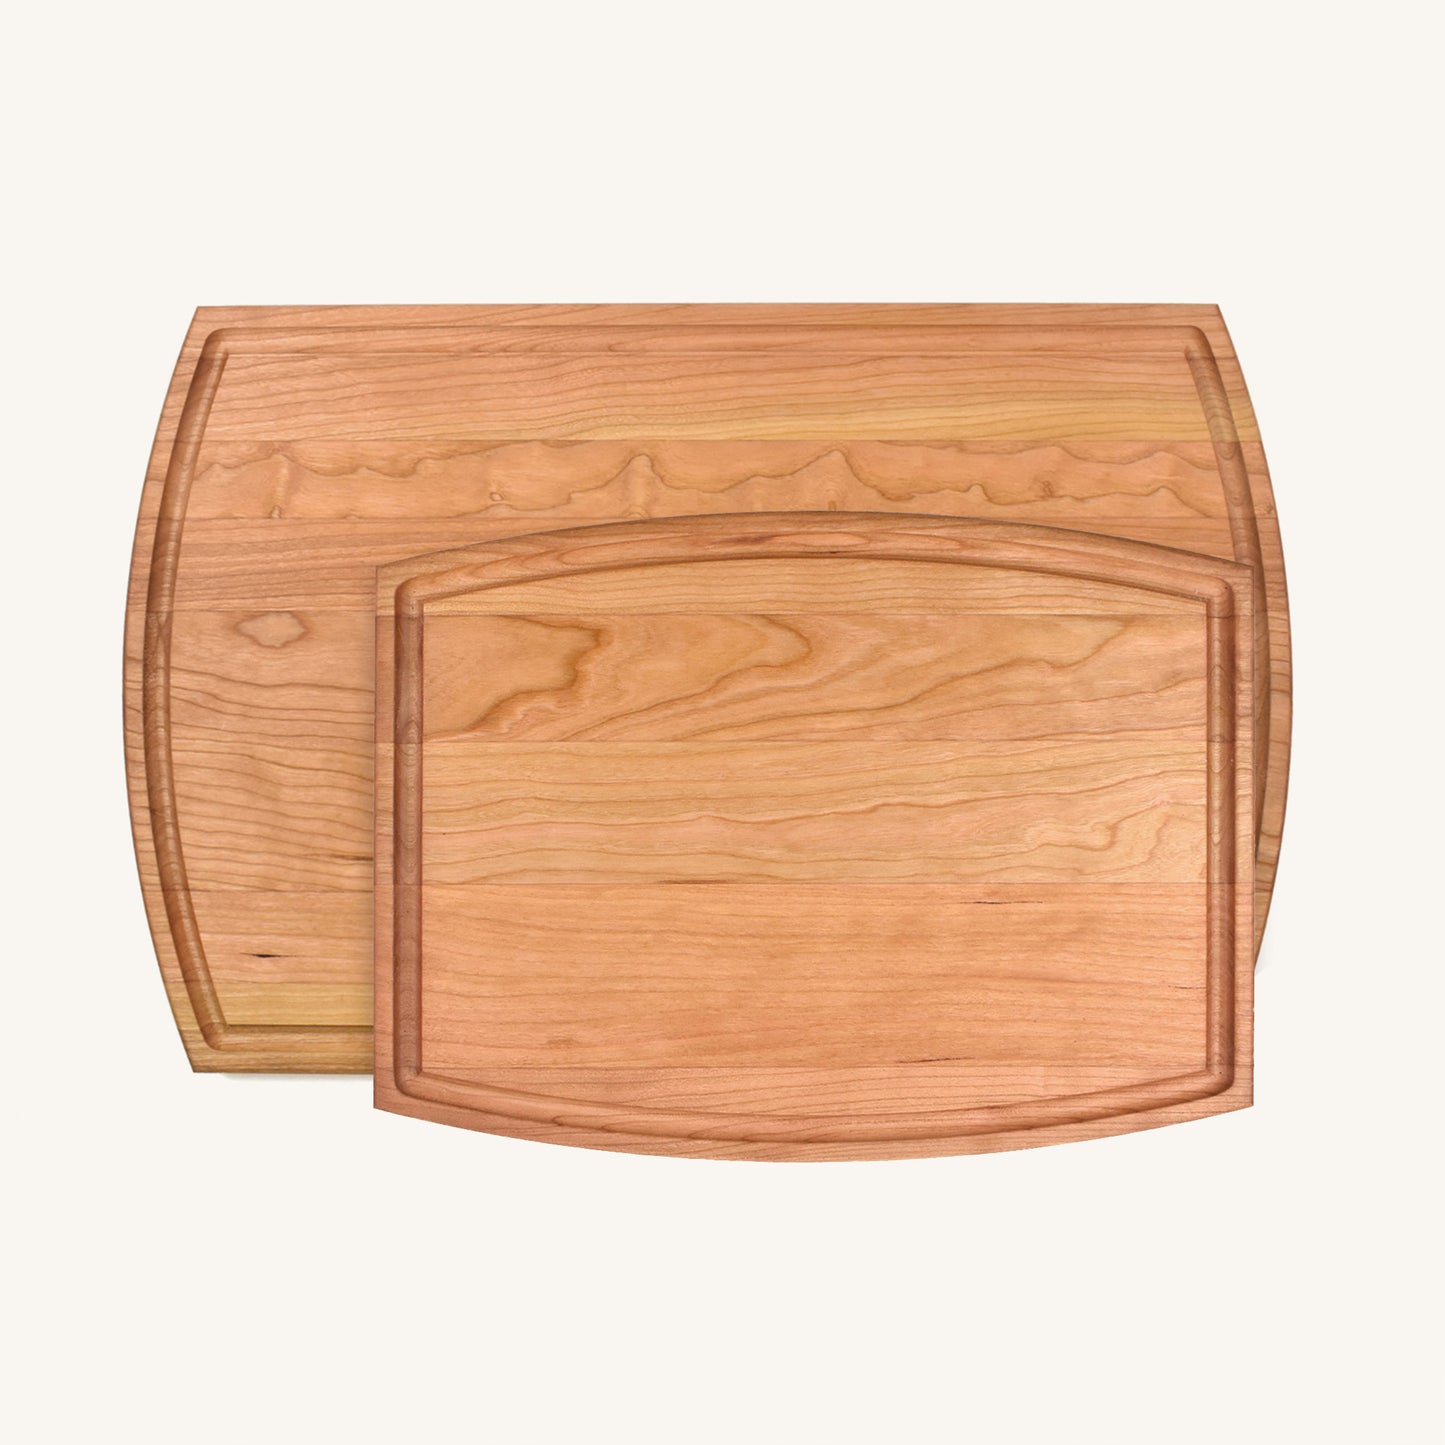 Bundle of Medium and Large Arched Wood Cutting Board